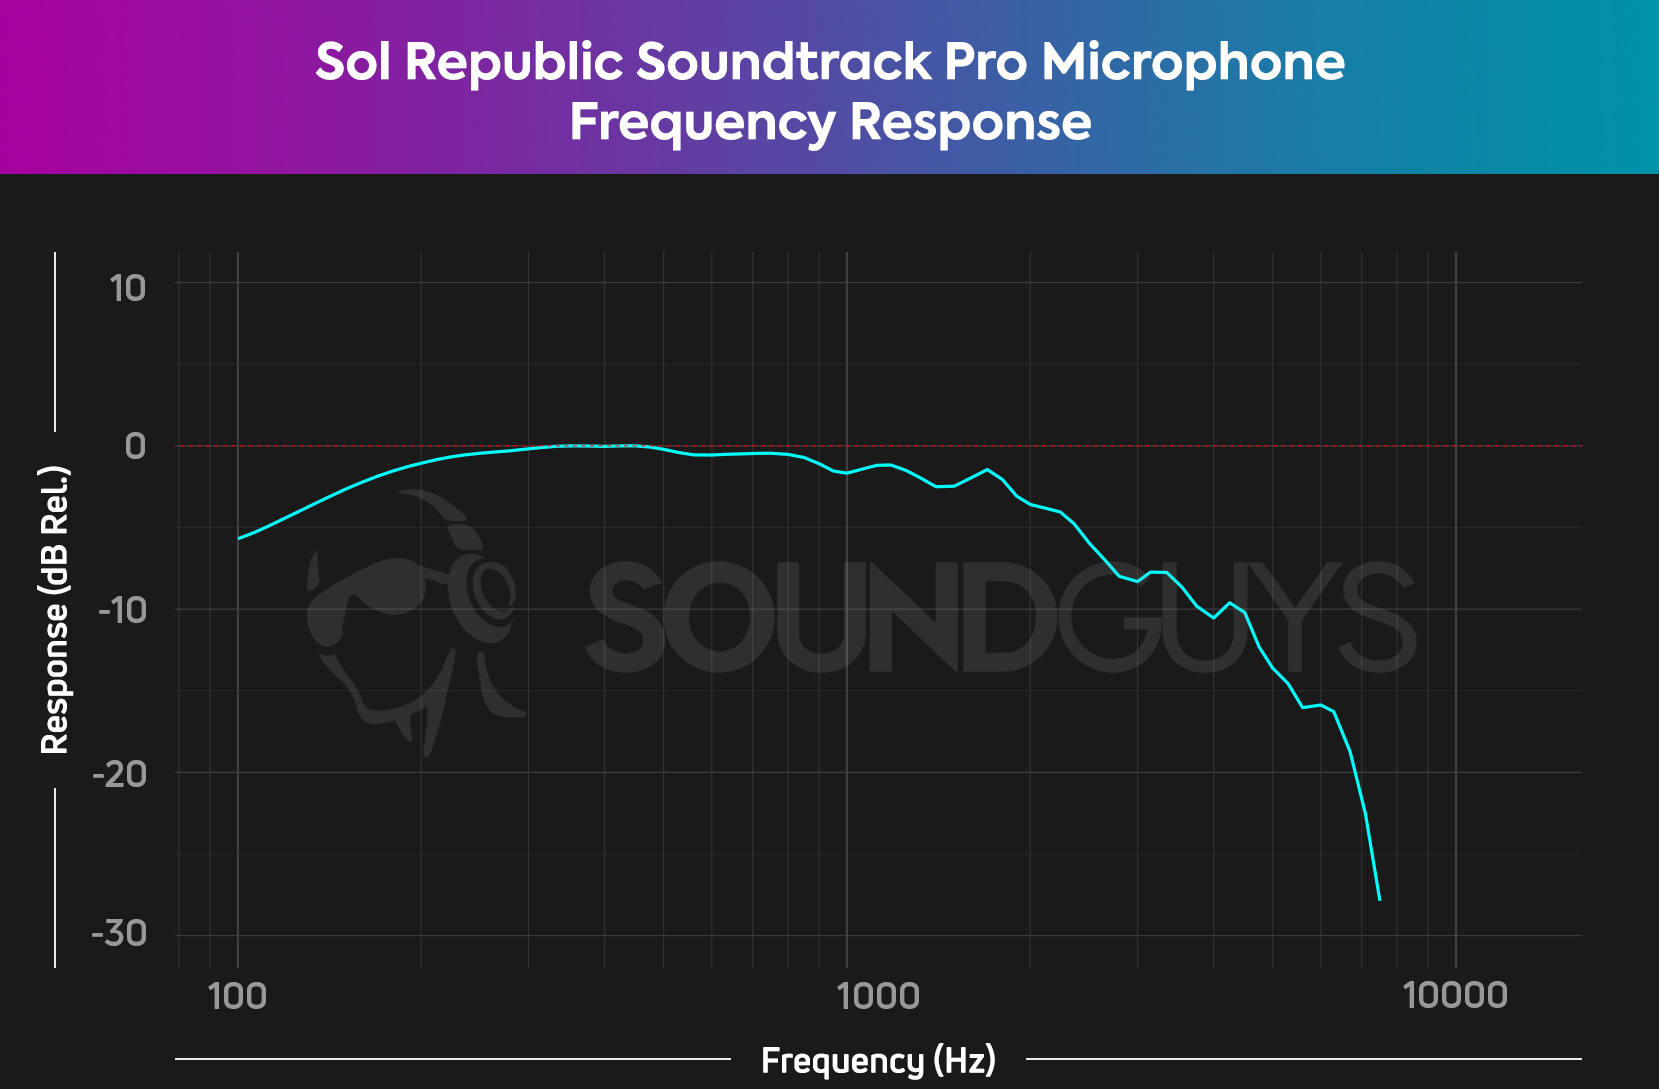 A chart showing the microphone frequency response of the Sol Republic Soundtrack Pro with significant drop-off above 2kHz.